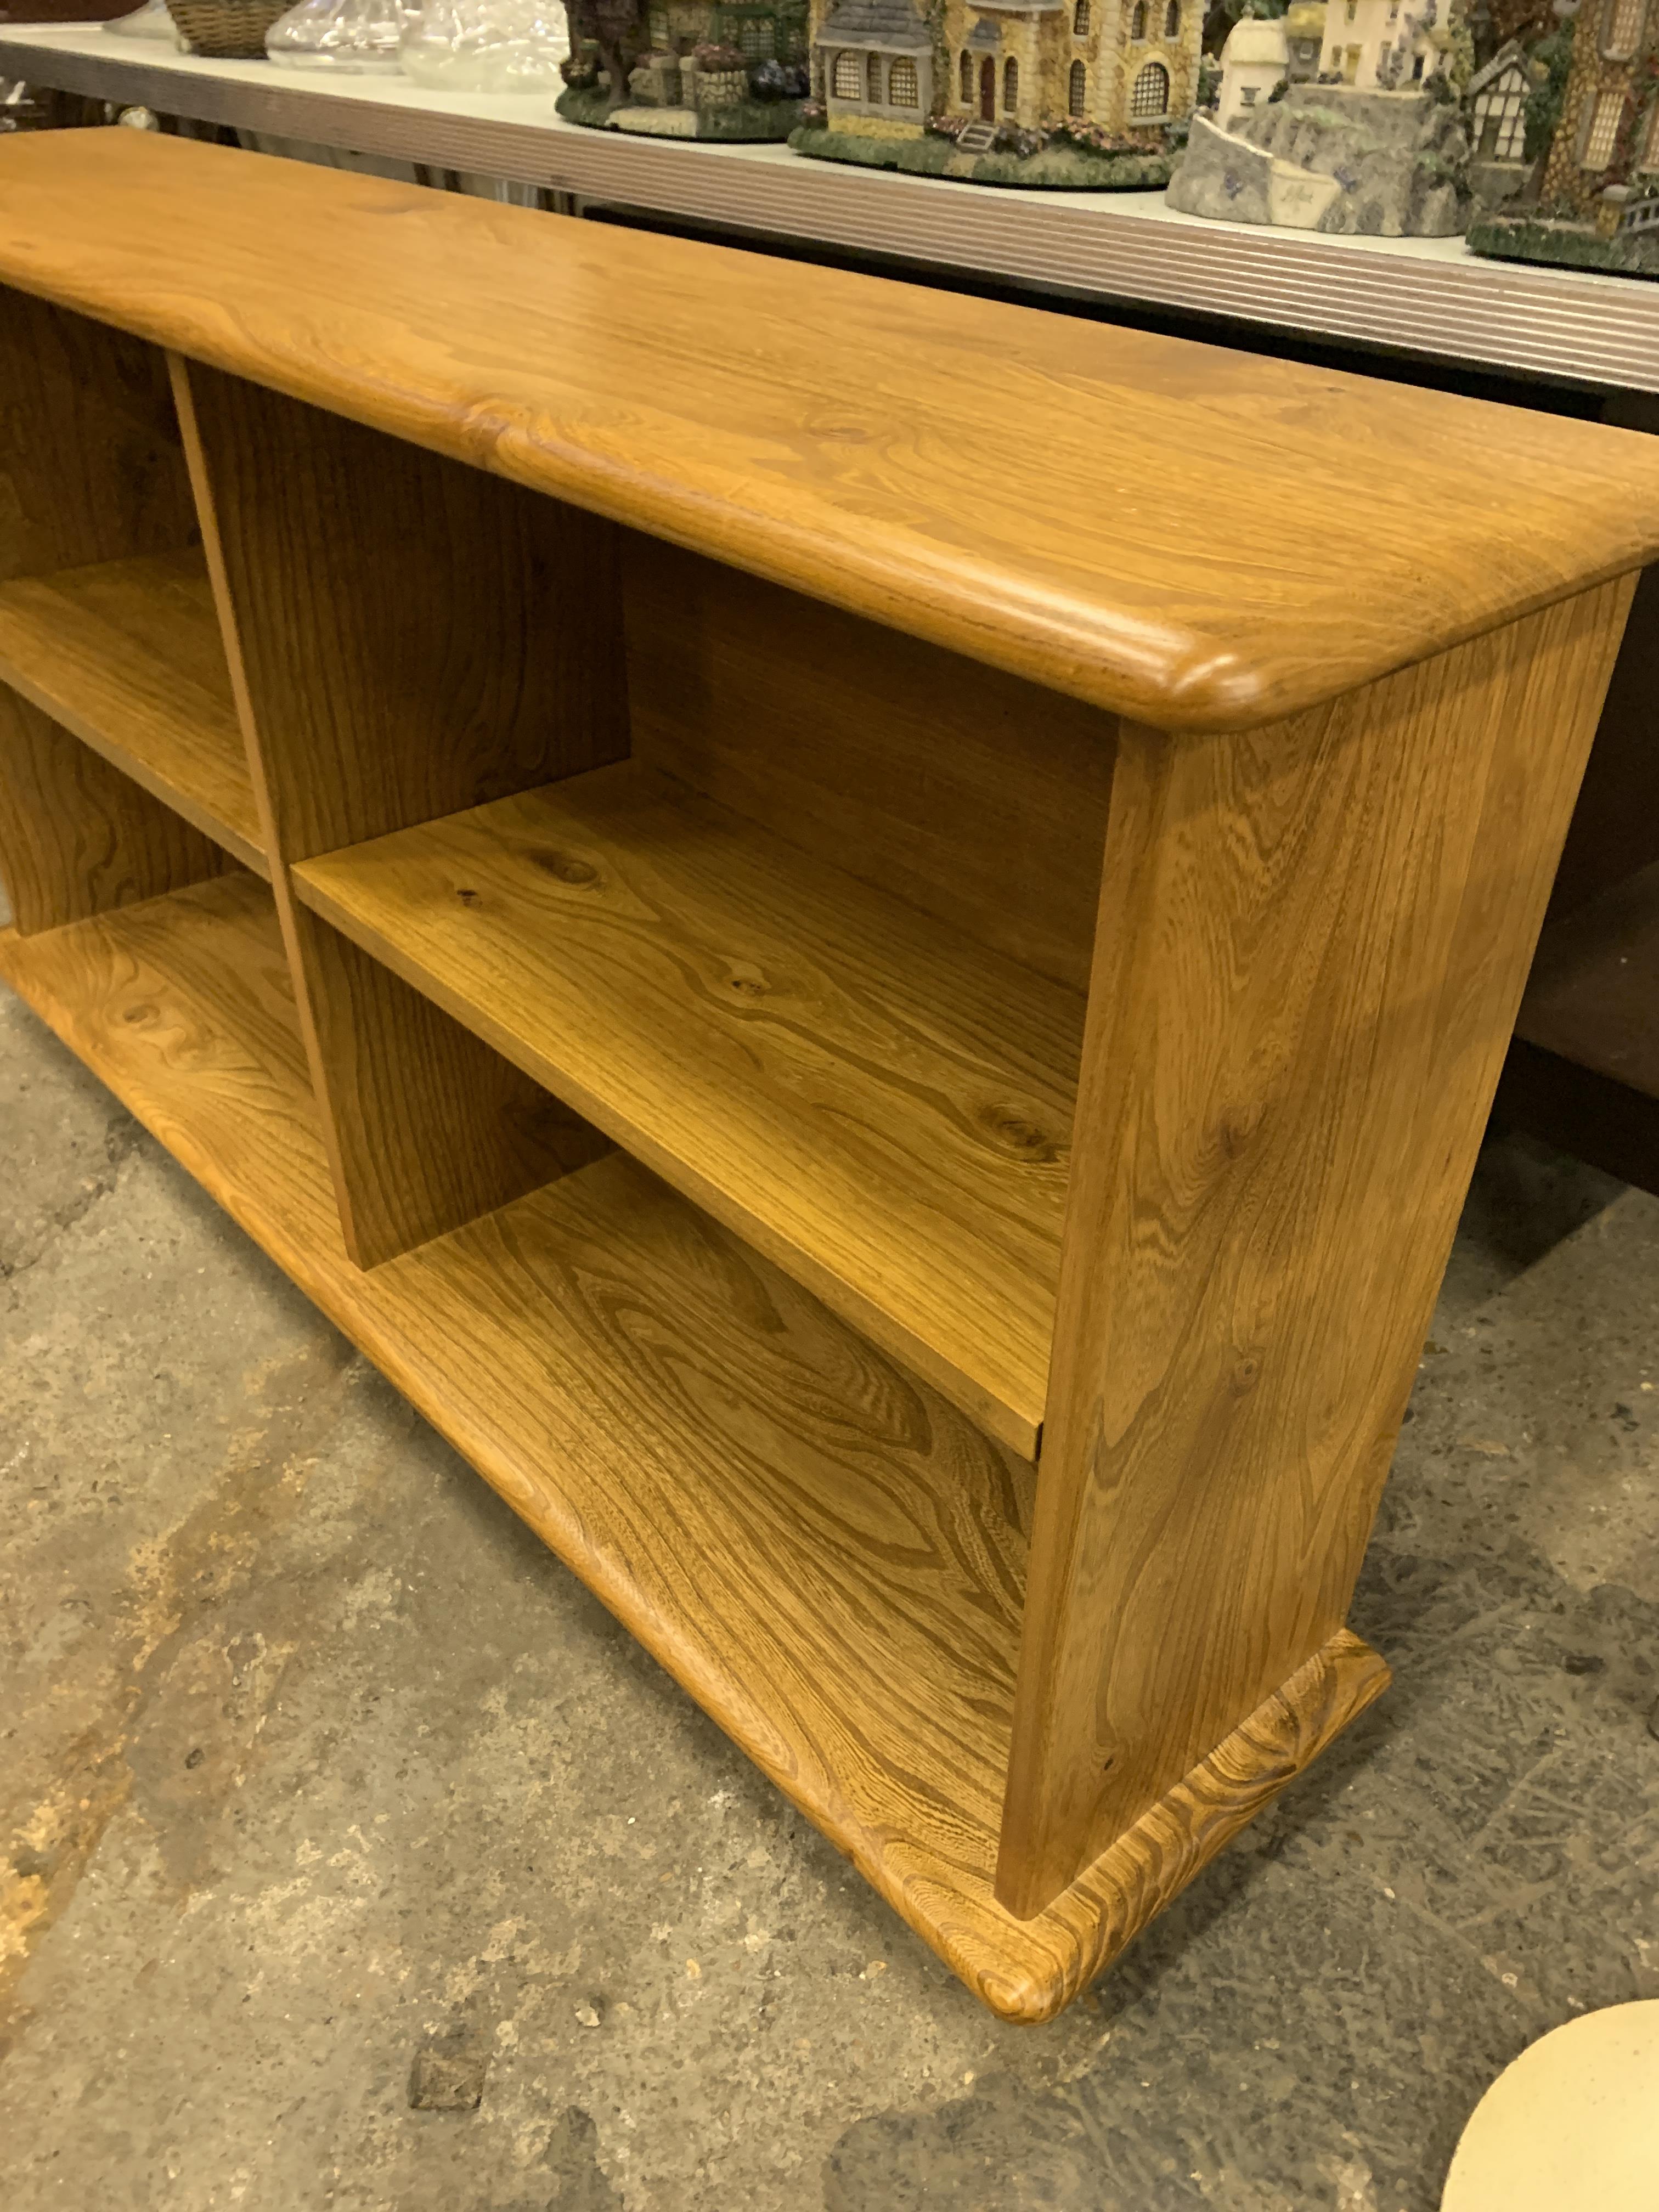 Ercol style open display shelves, - Image 3 of 4